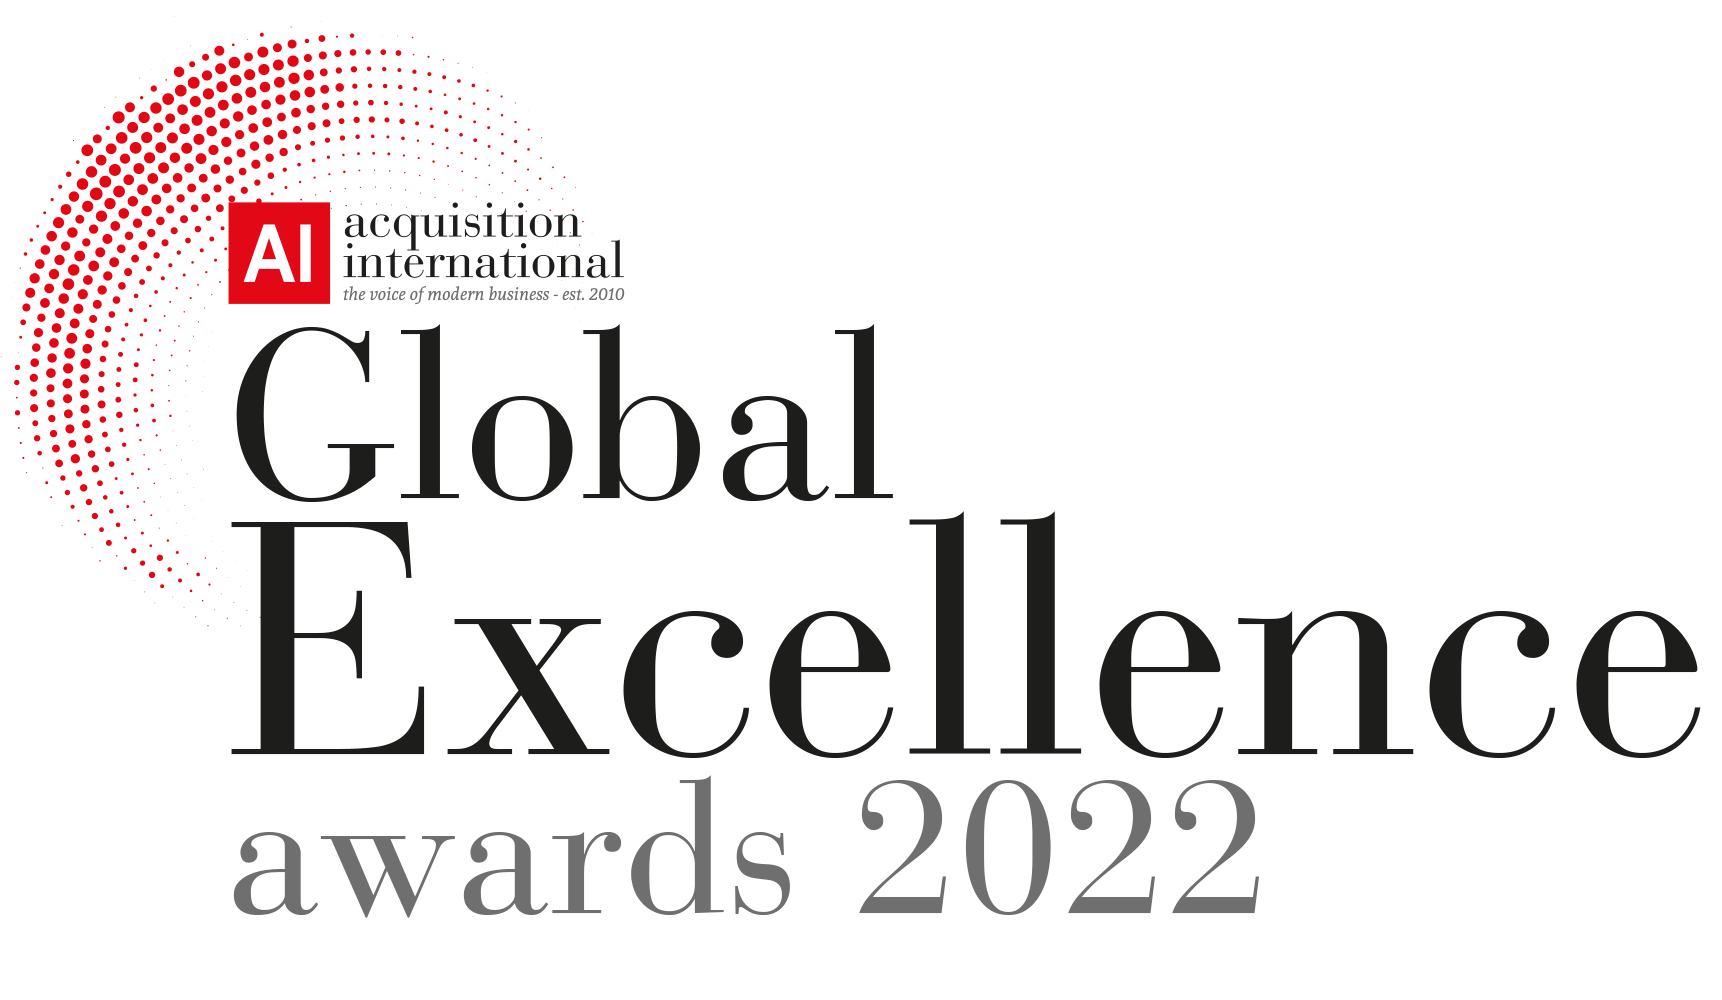 2022 Global Excellence Awards